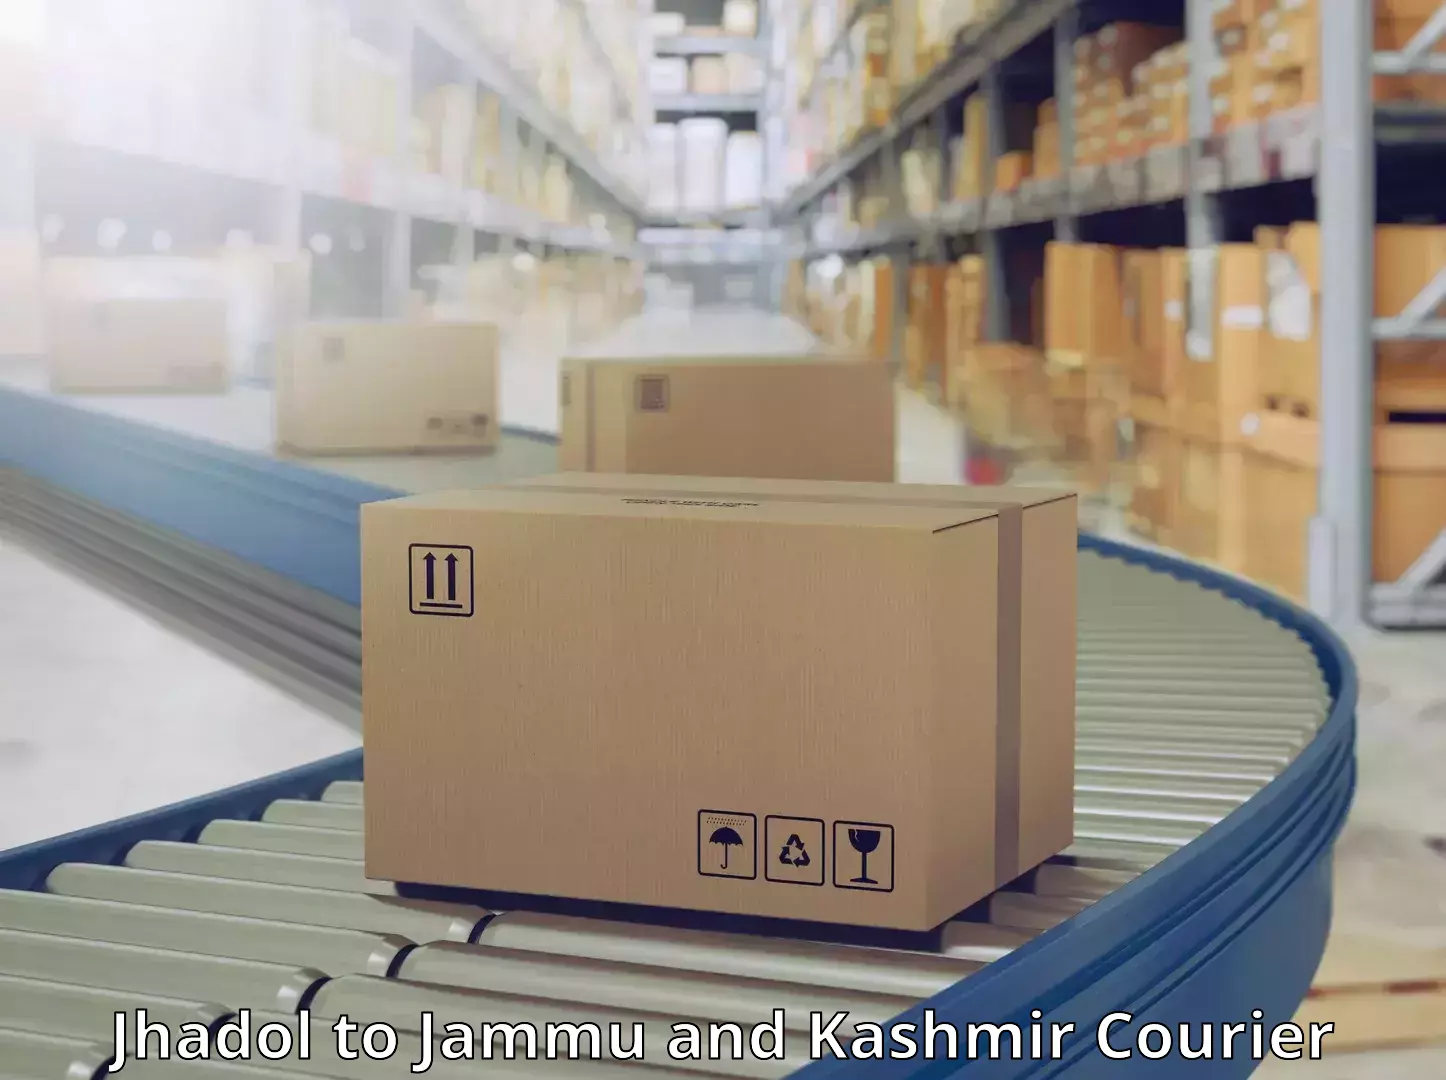 State-of-the-art courier technology in Jhadol to Katra